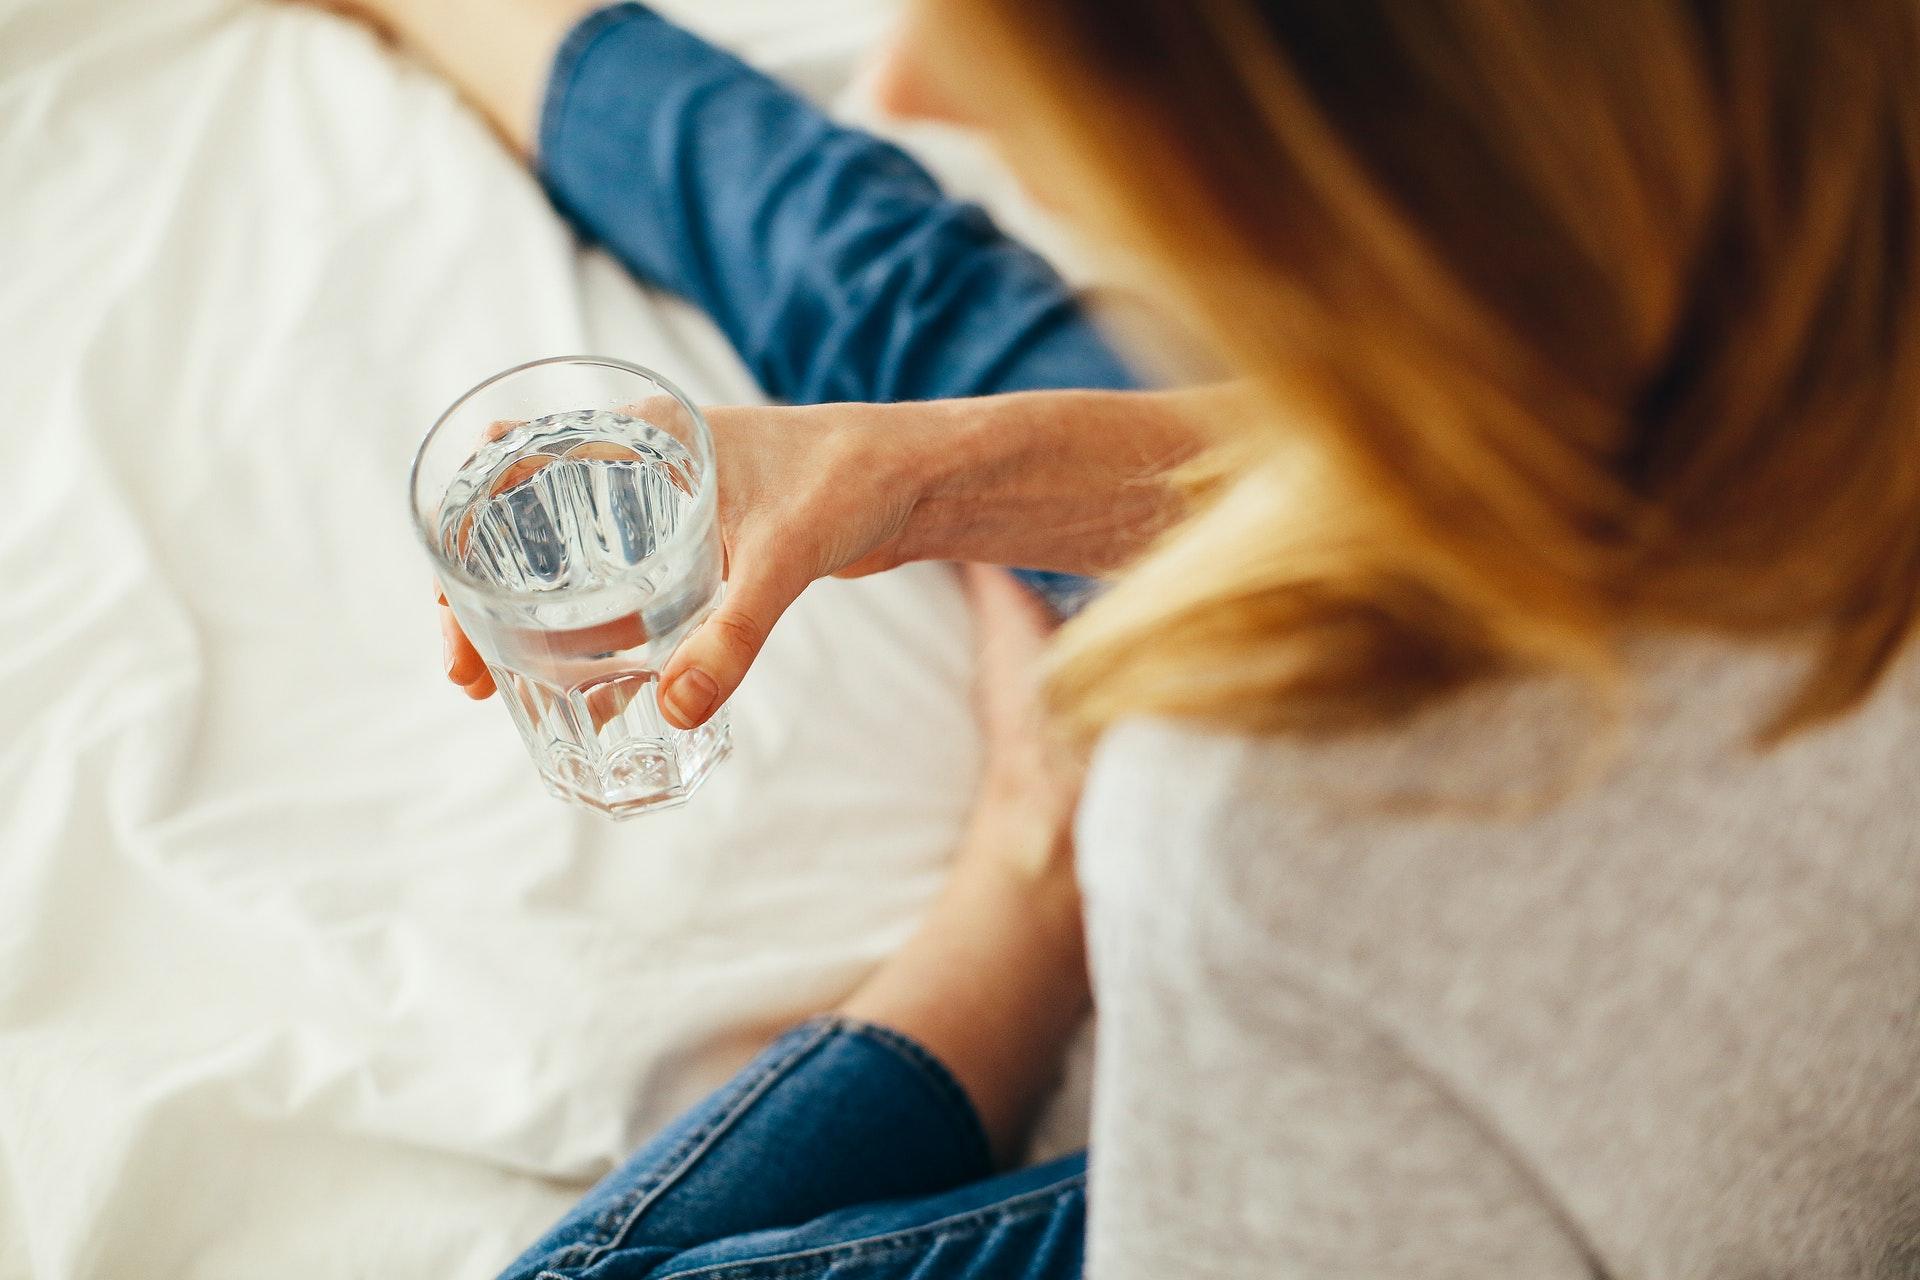 woman-holding-glass-of-water-in-hand-laying-on-bed.jpg